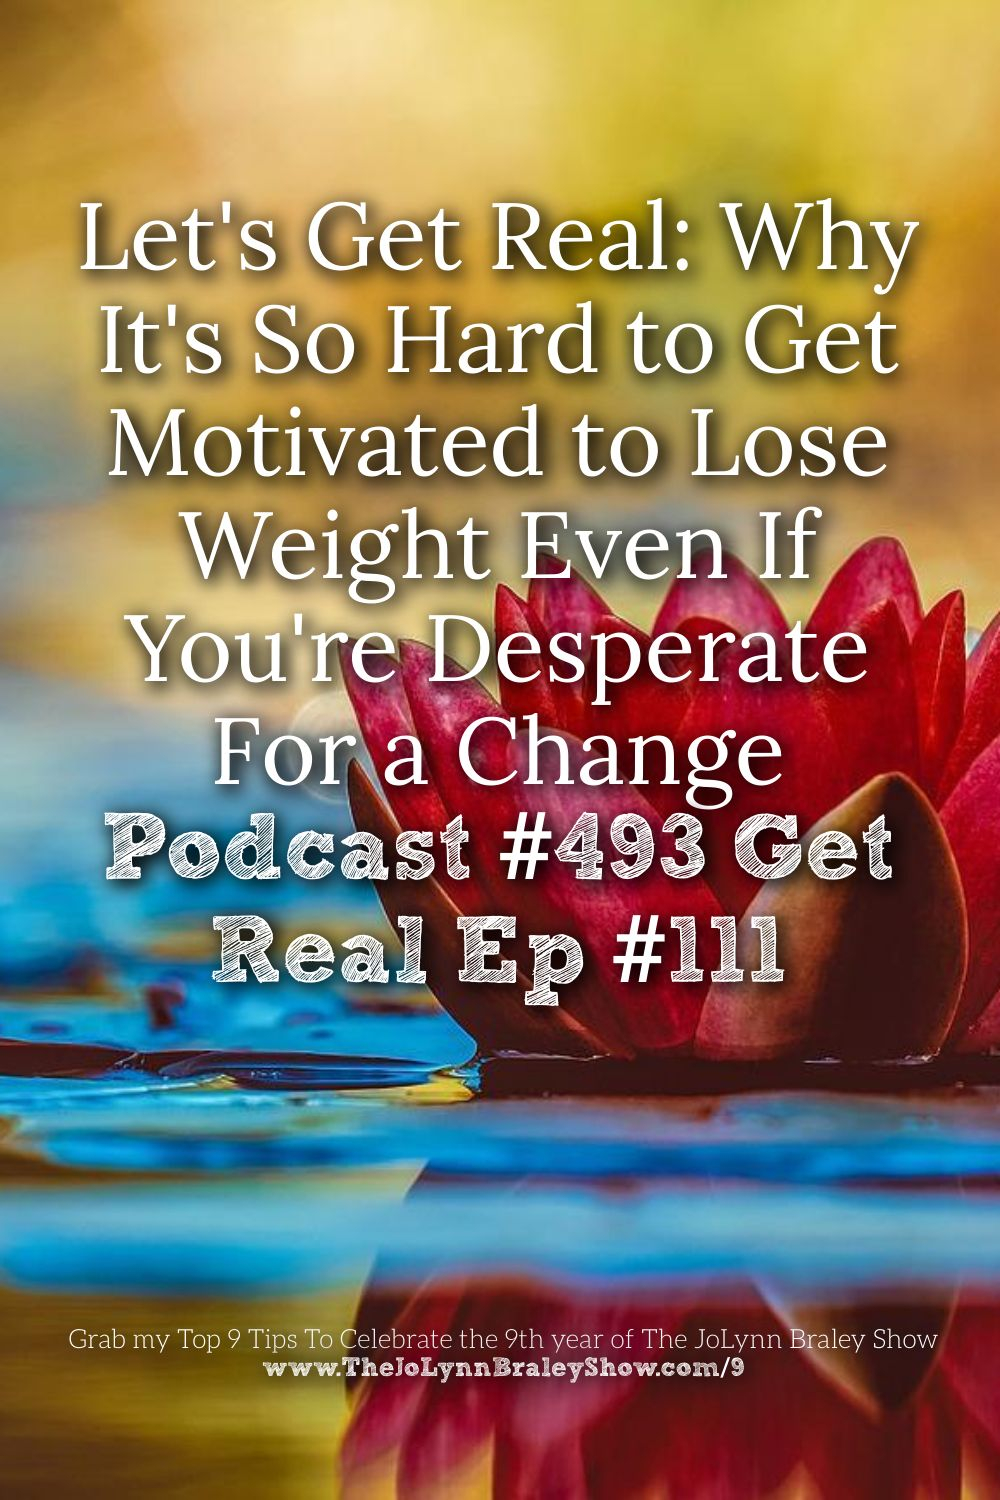 Let\'s Get Real: Why It\'s So Hard to Get Motivated to Lose Weight Even If You\'re Desperate For a Change [Podcast #493]